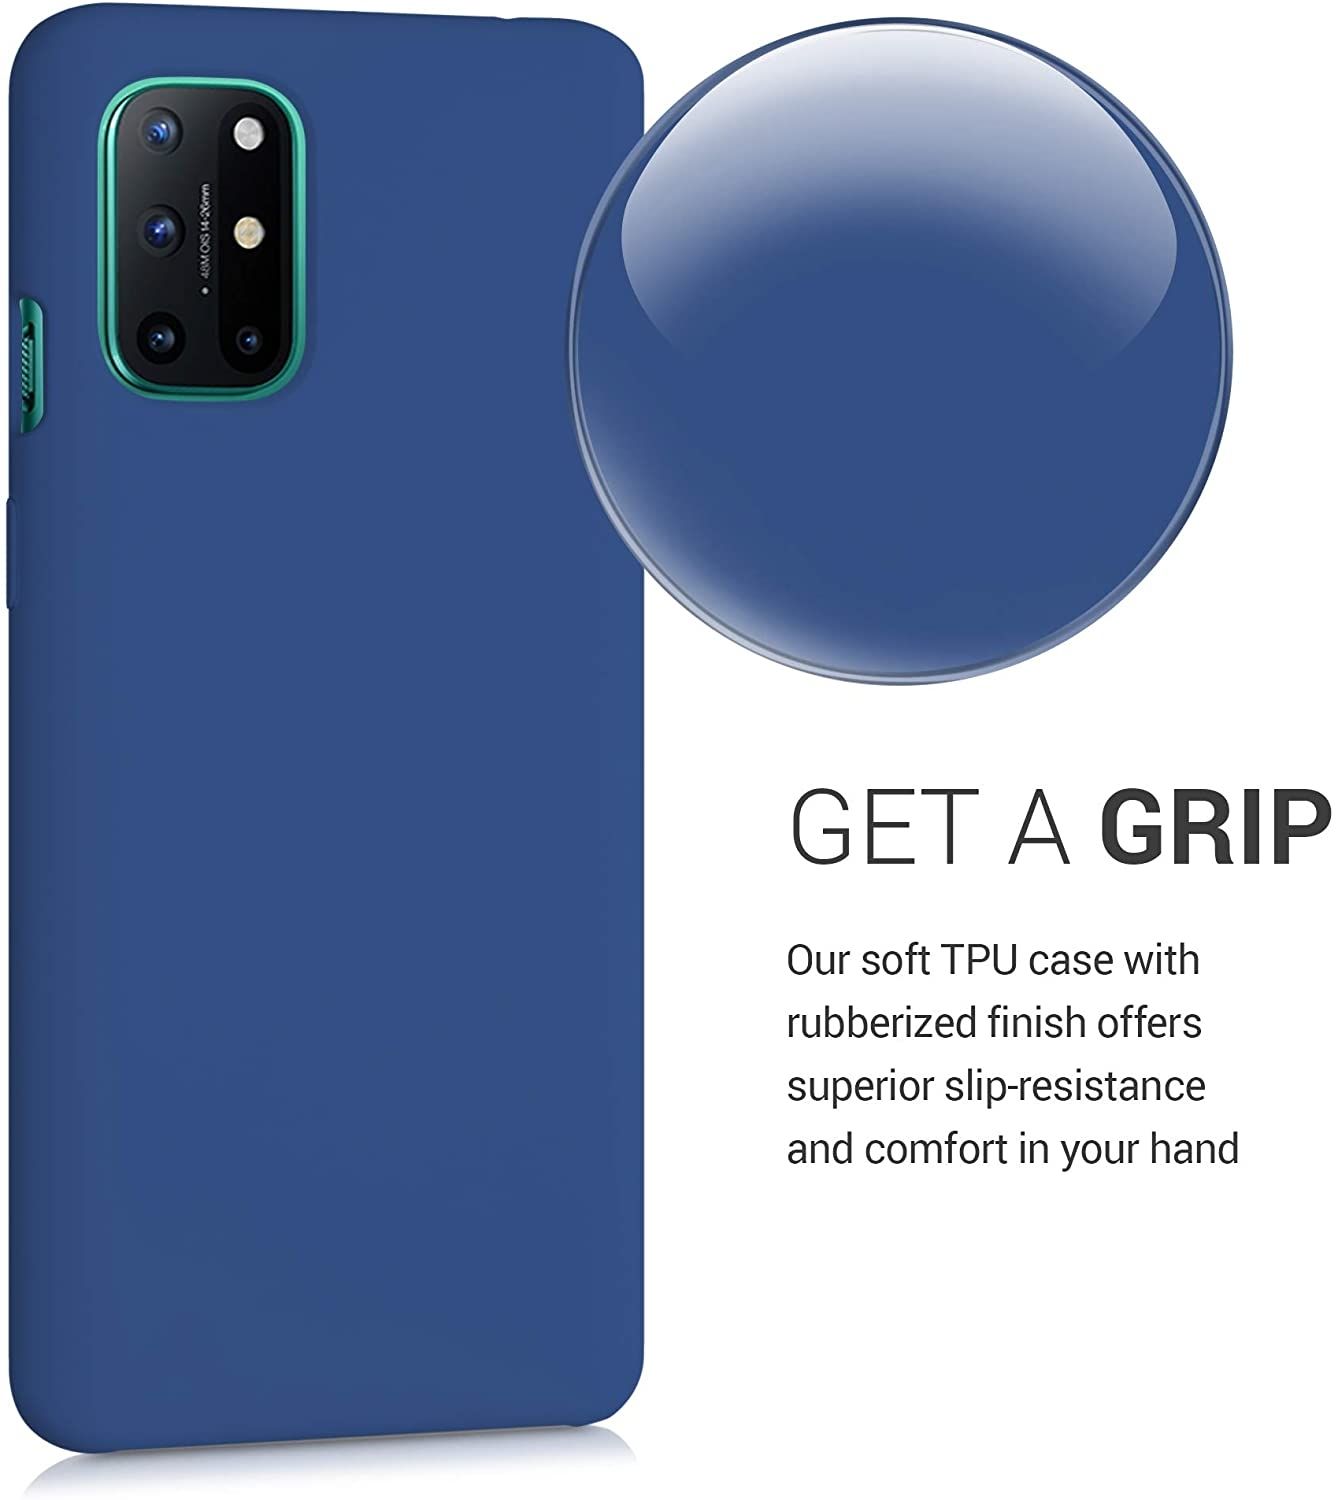 kw-mobile-thiki-silikonis-oneplus-8-t-soft-flexible-rubber-cover-navy-blue-2.jpg